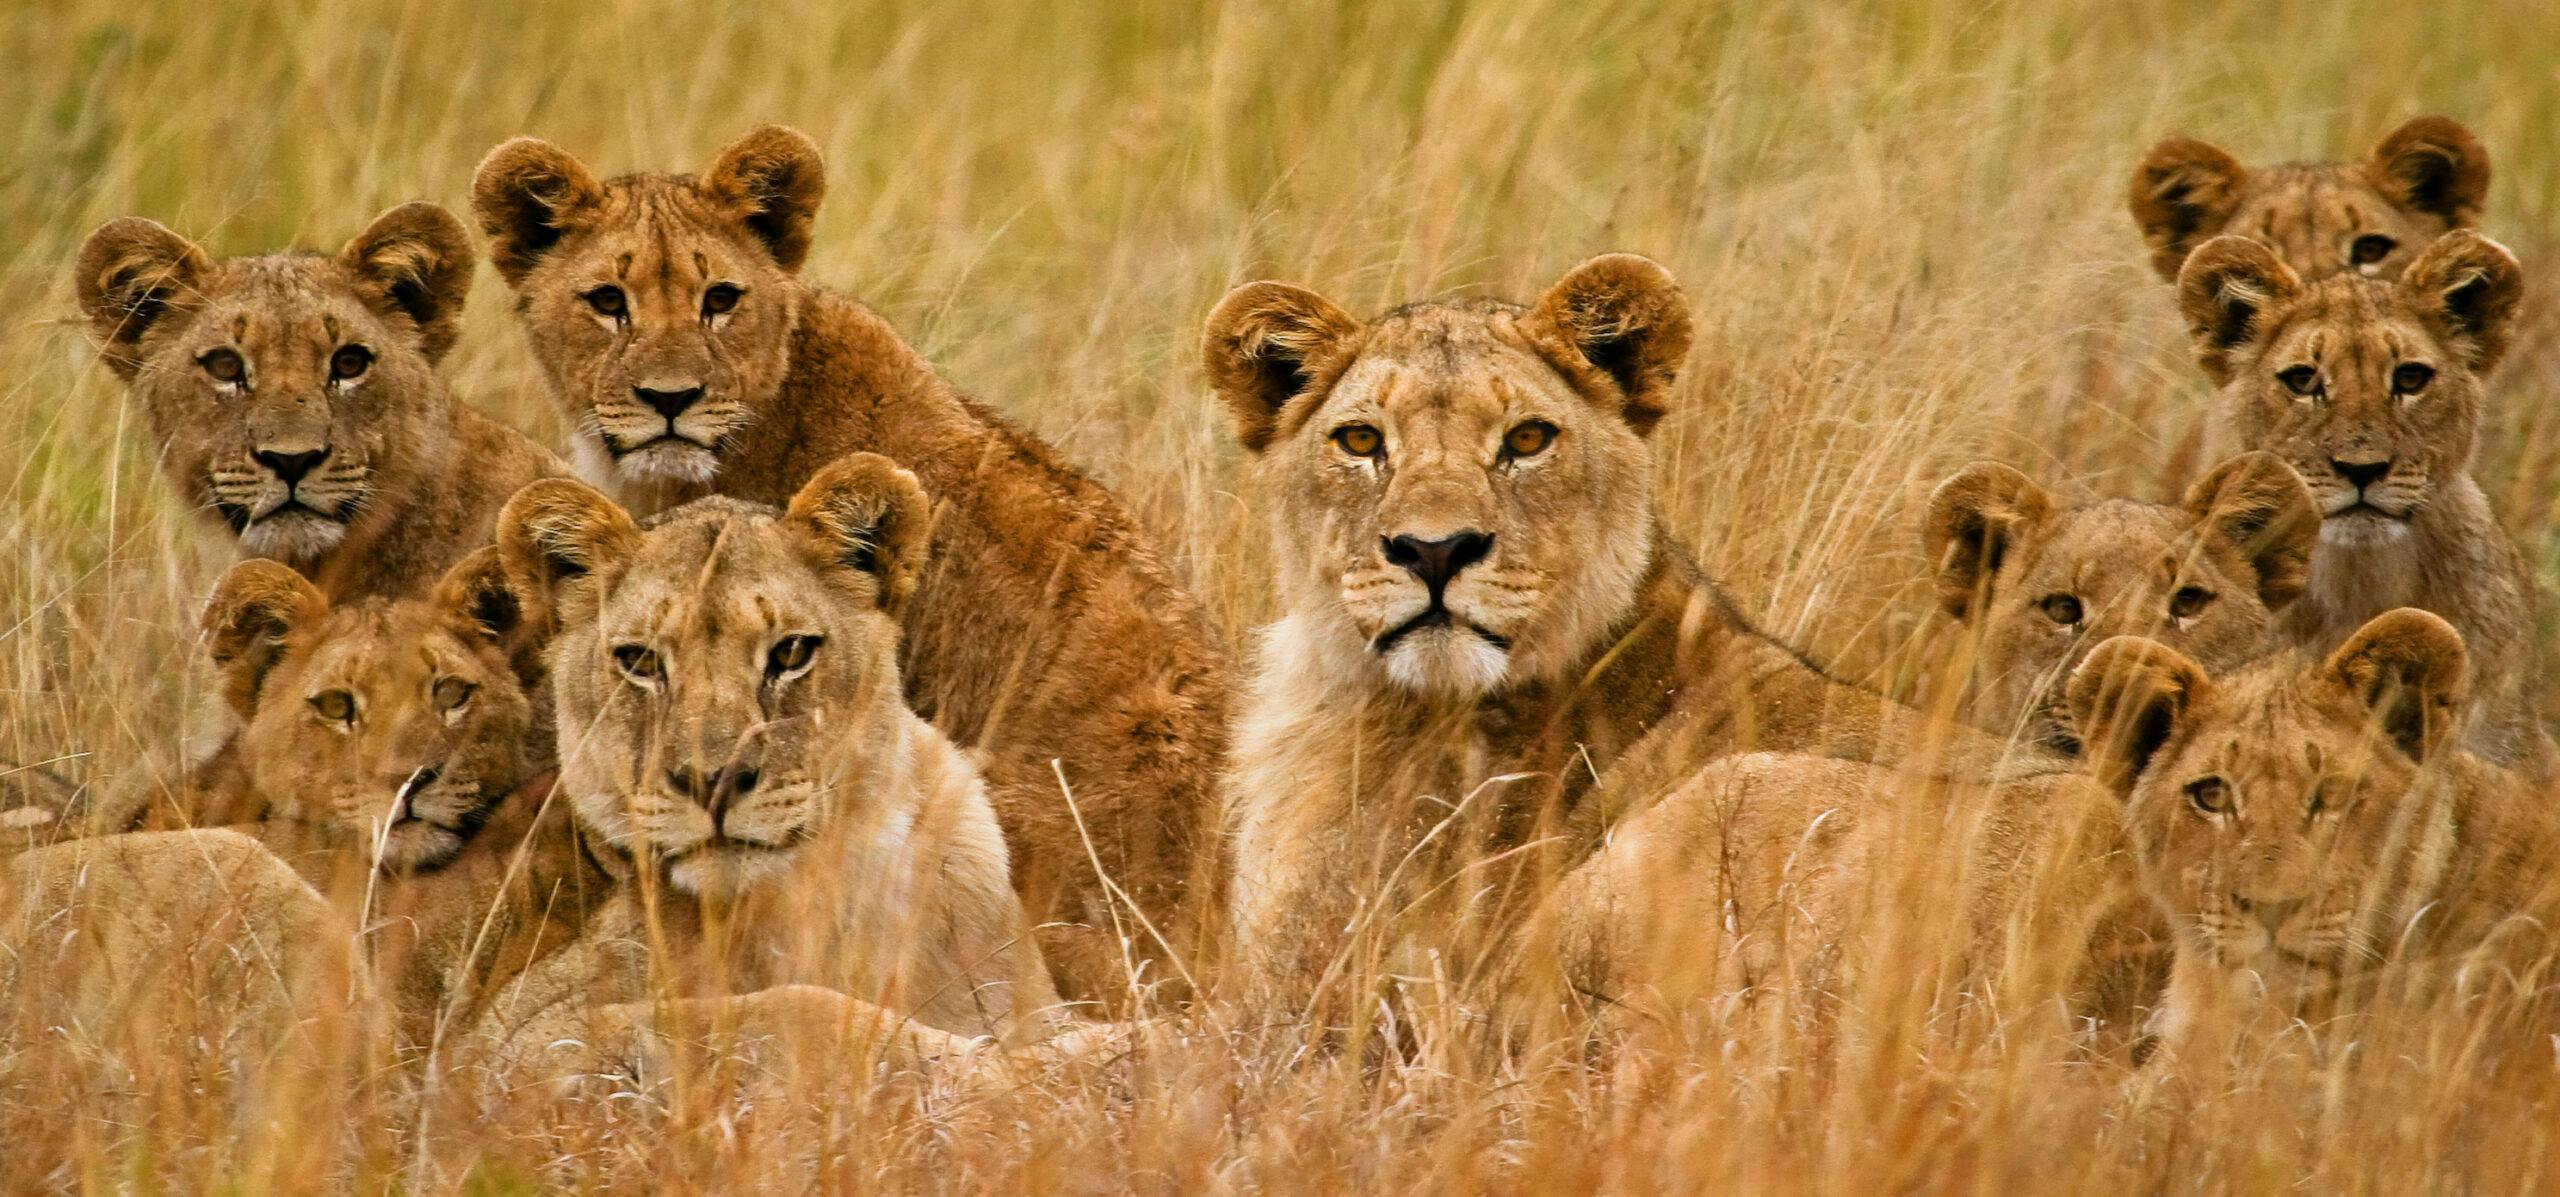 Family of African Lions looking very alert on the Serengeti plains in Tanzania, Africa